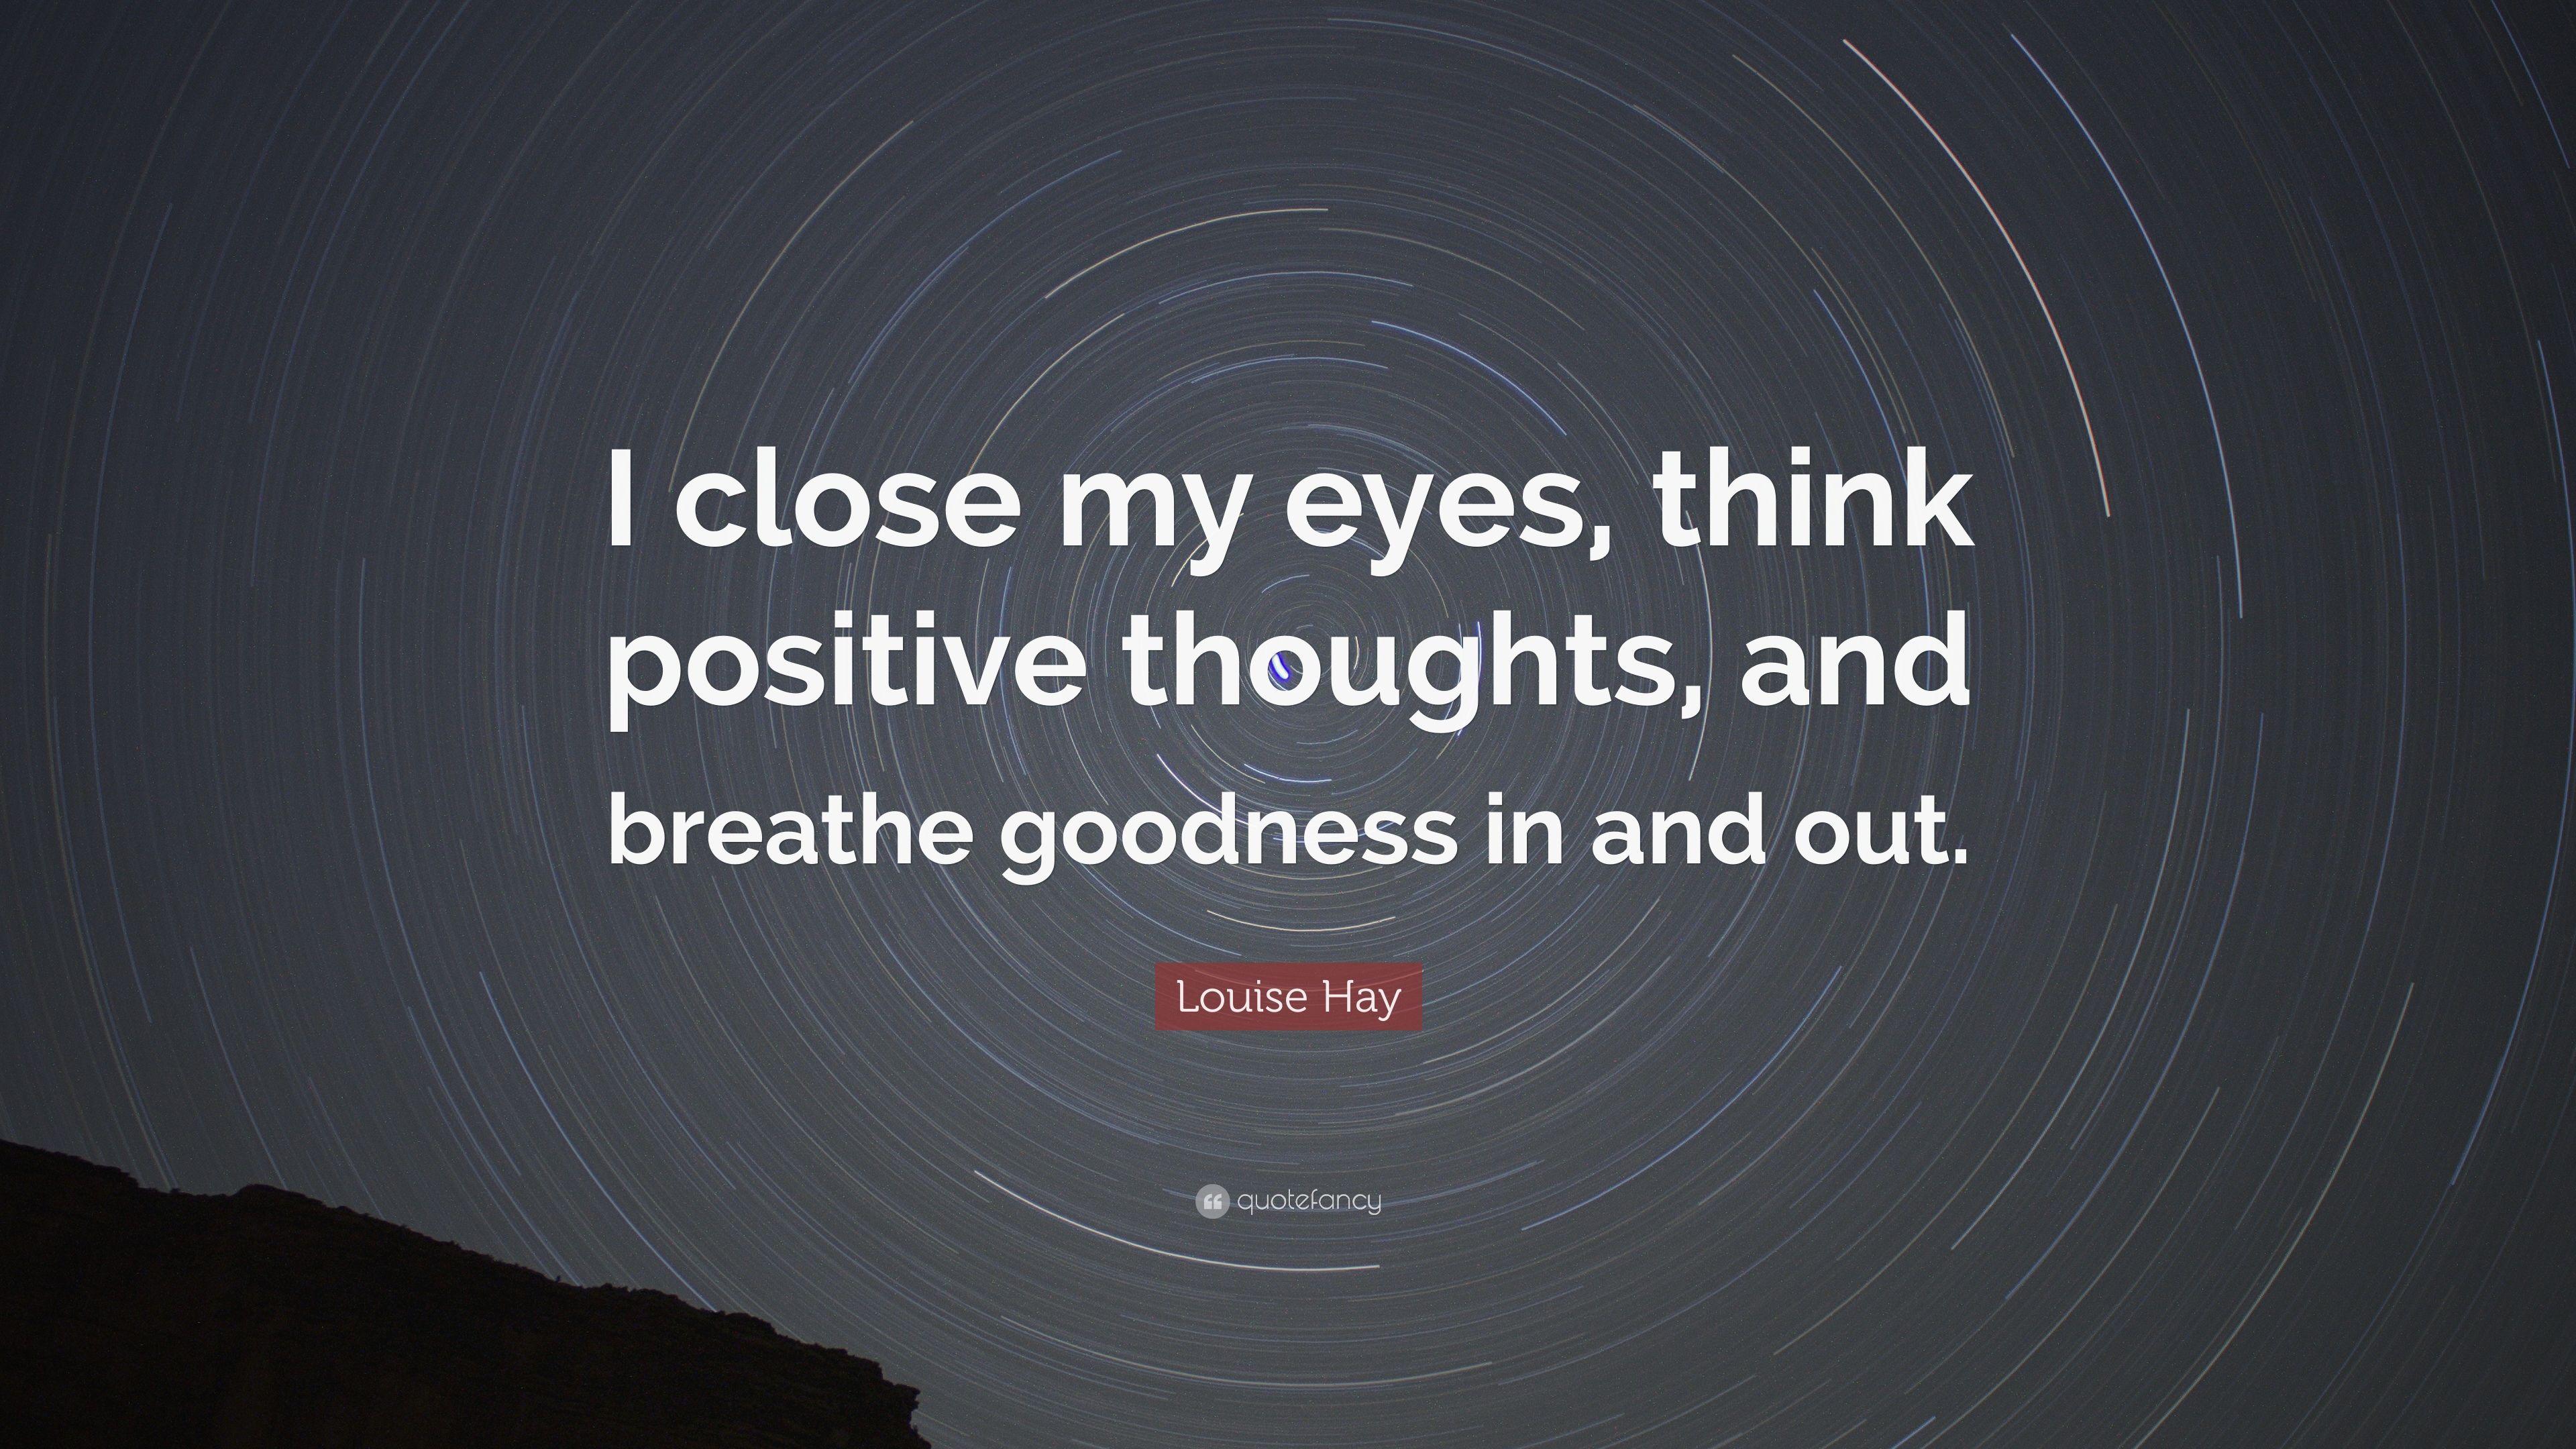 Louise Hay Quote: “I close my eyes, think positive thoughts